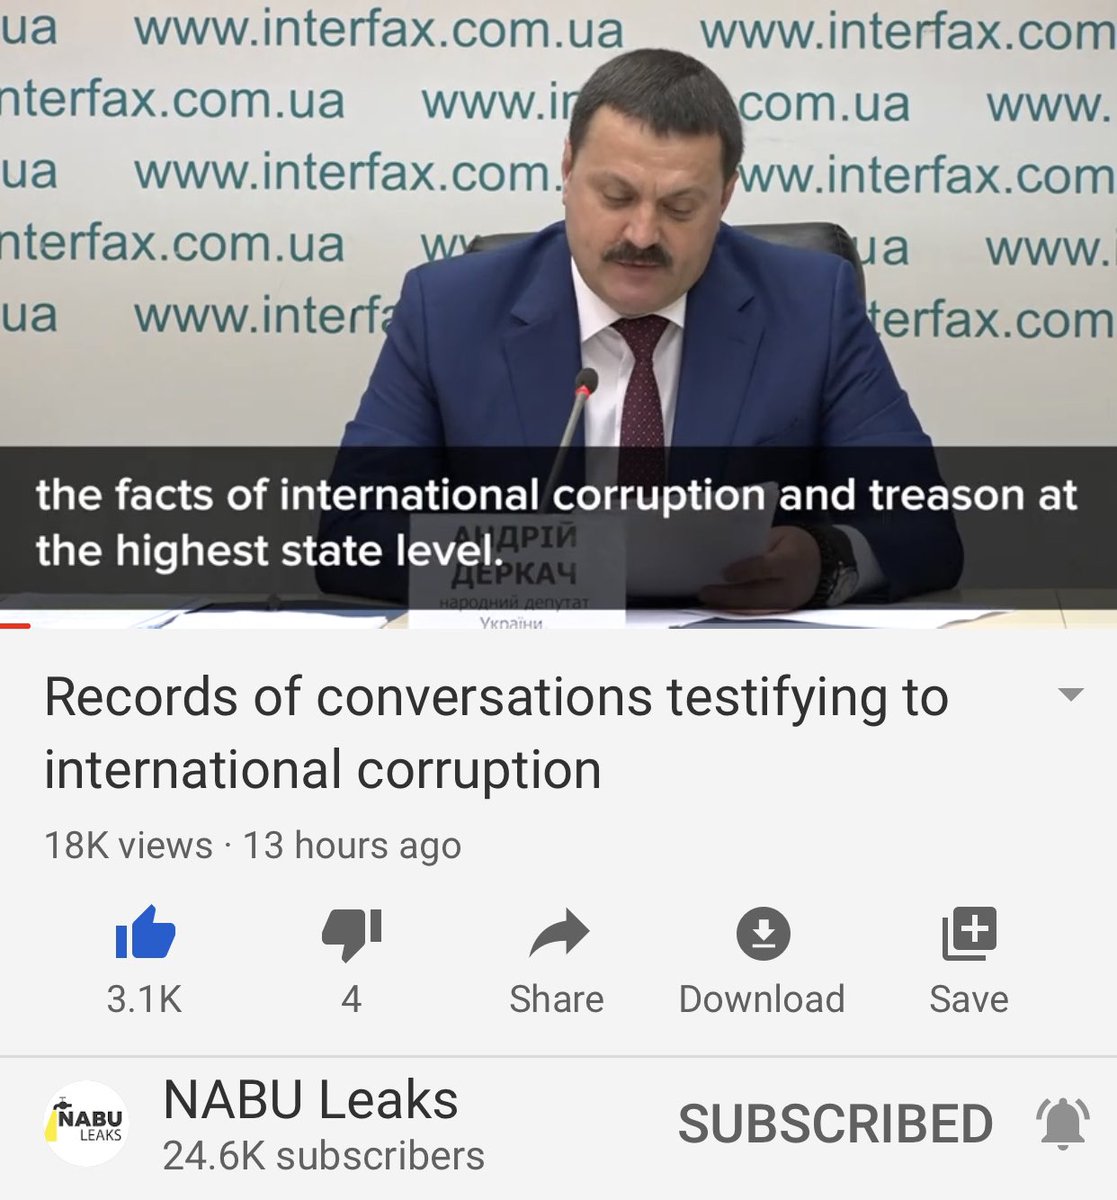 I forgot to add these screenshots which detail that they are calling this  #treason and claim that US diplomats and others stole money from Ukrainian taxpayers. Sorry. I really do suck at this but hey it’s better than listening to it, right?